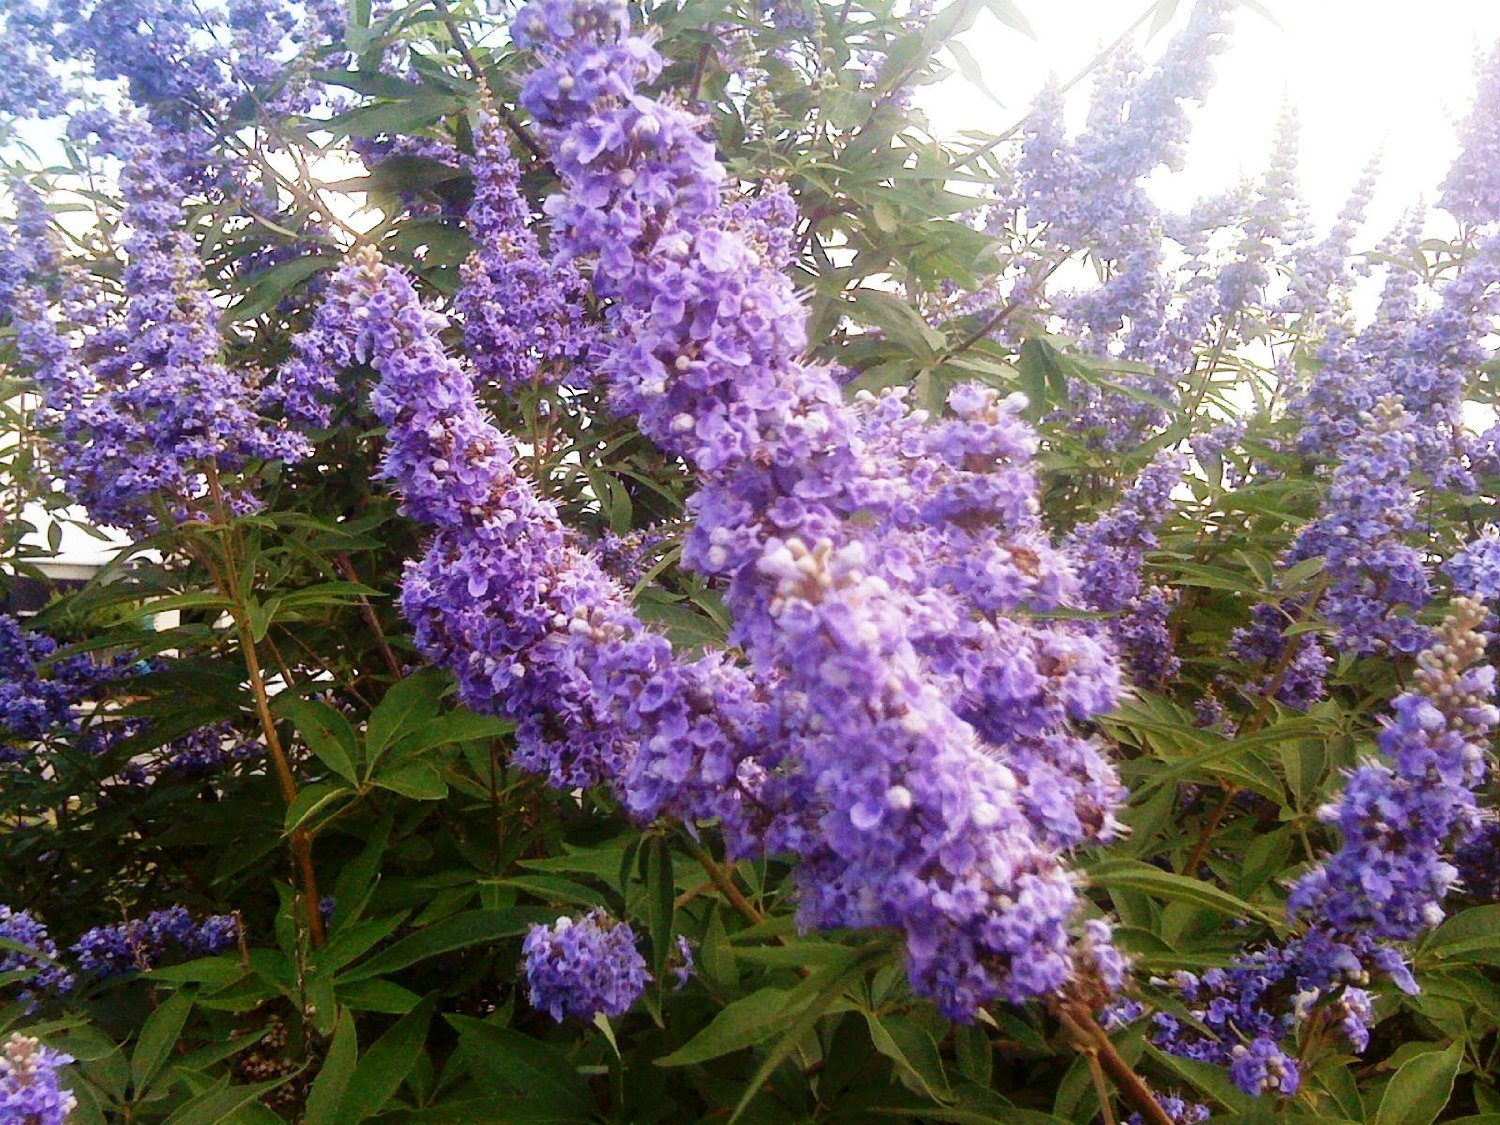 (5 Gallon) Vitex Shoal Creek, Tiny, Fragrant Lilac Flowers In Loose Panicles, Aromatic, Compound, Palmate, Grayish-Green Leaves.